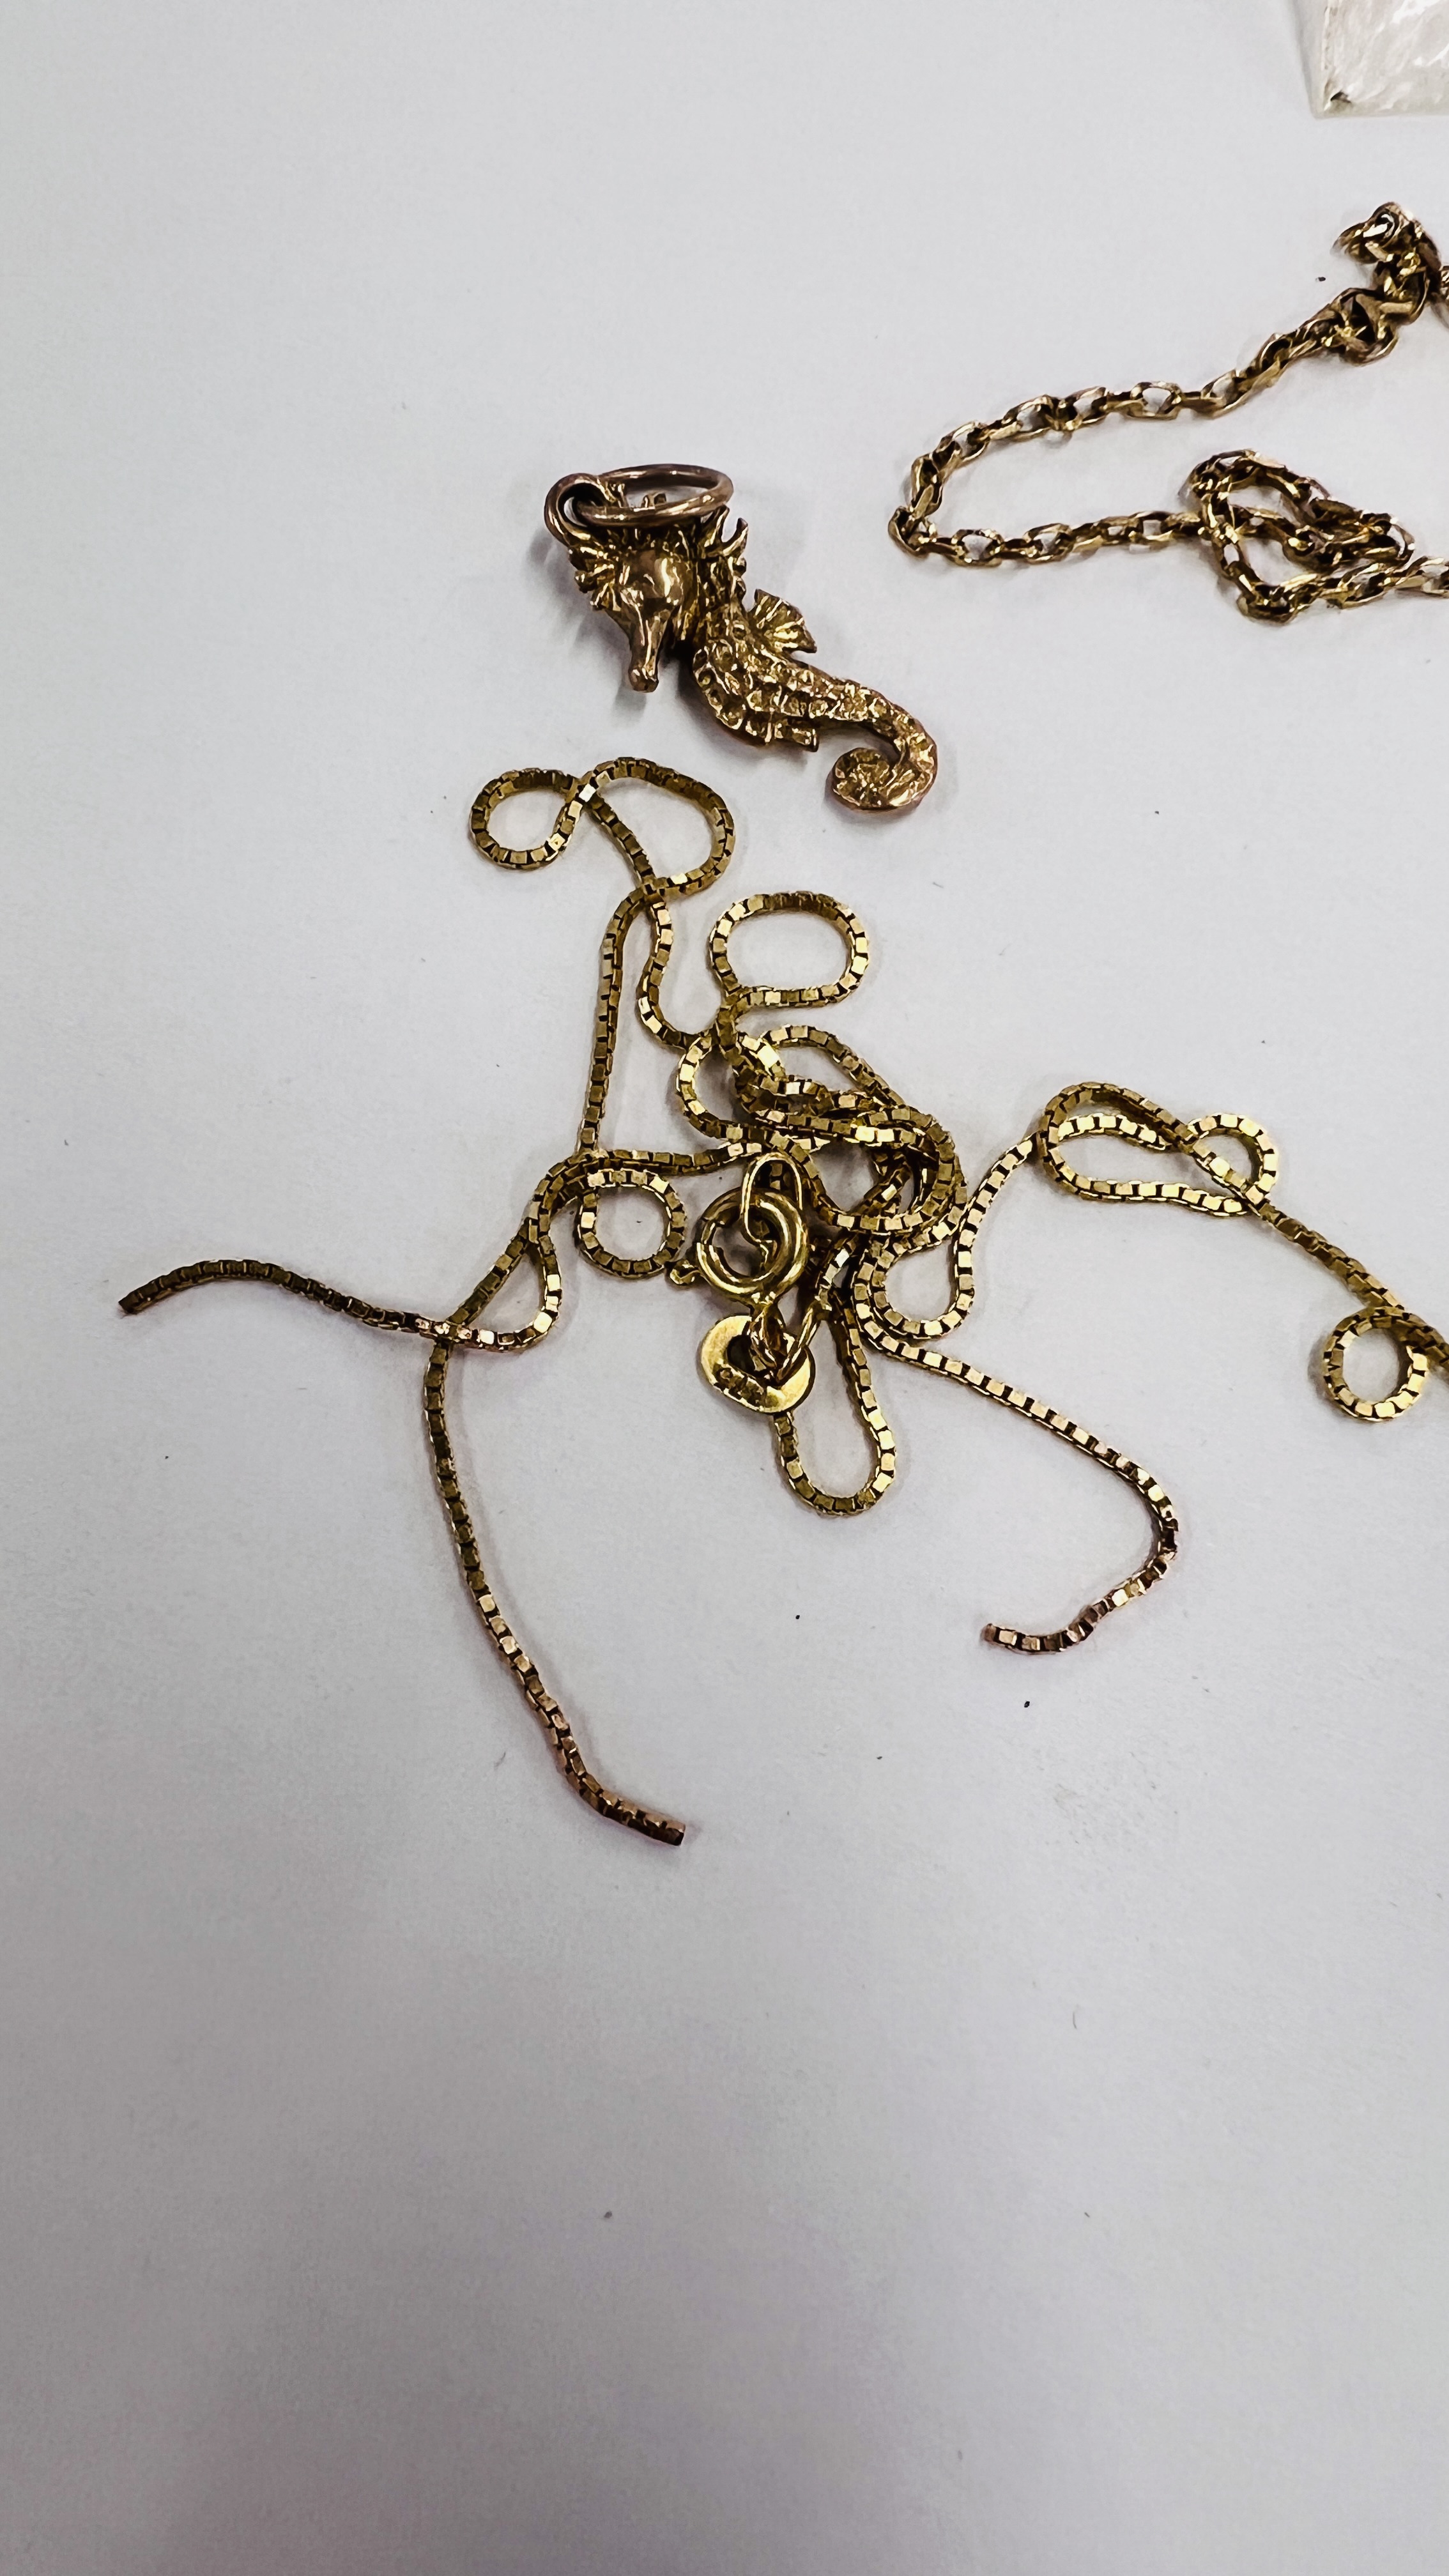 A FINE 9CT GOLD BRACELET AND NECKLACE A/F ALONG WITH A YELLOW METAL SEAHORSE PENDANT / CHARM. - Image 3 of 5